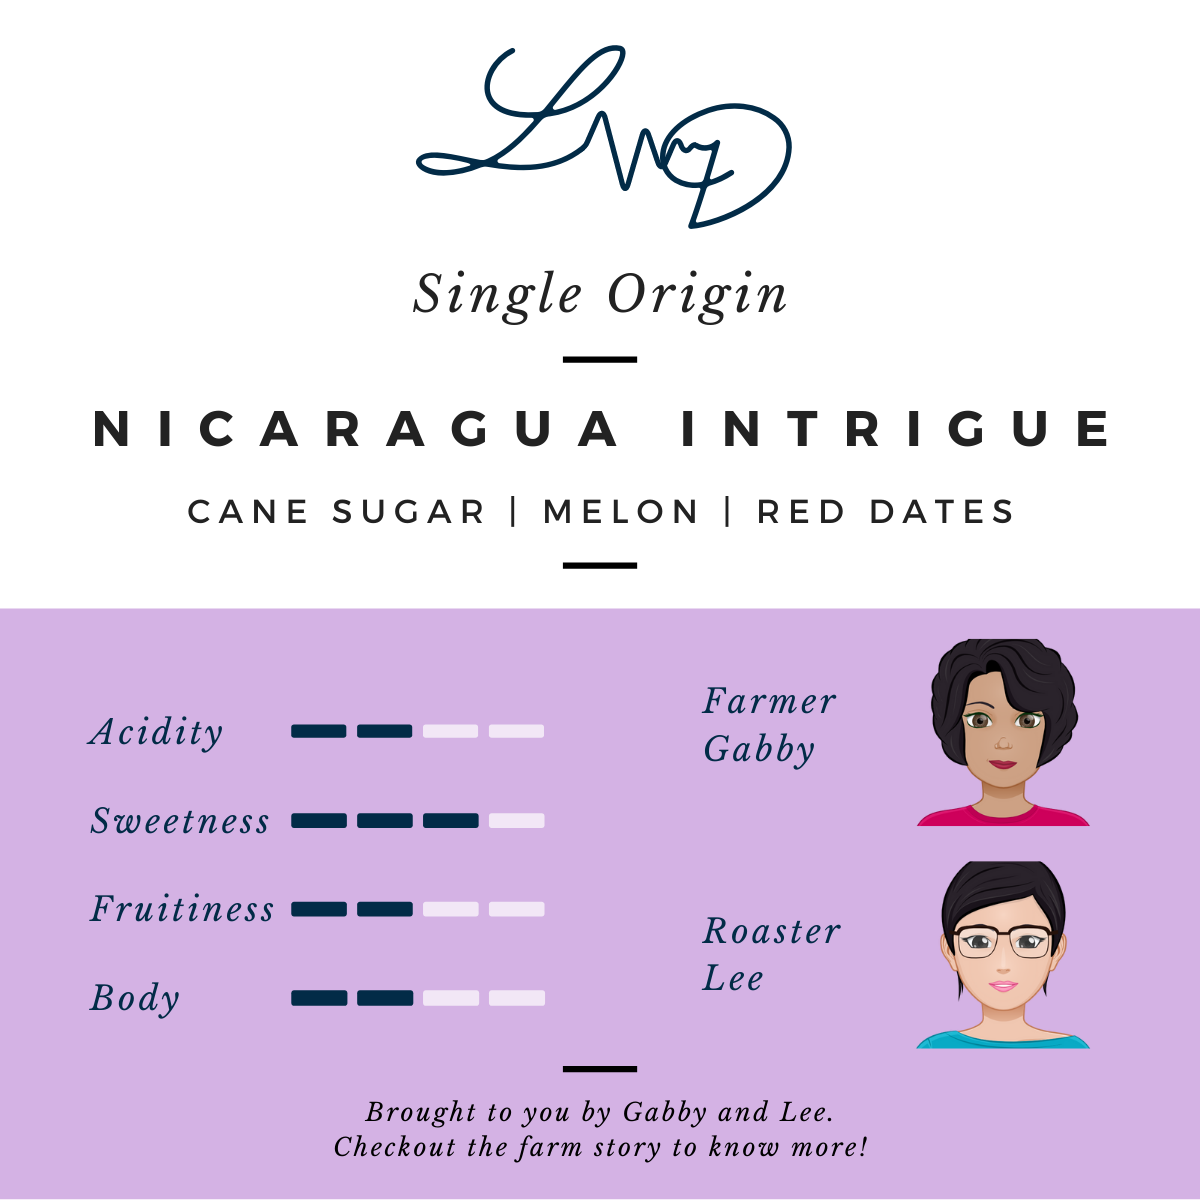 Freshly Roasted Nicaragua Specialty Coffee by LivDiff. Cane Sugar, Red Dates and Melon flavour profile